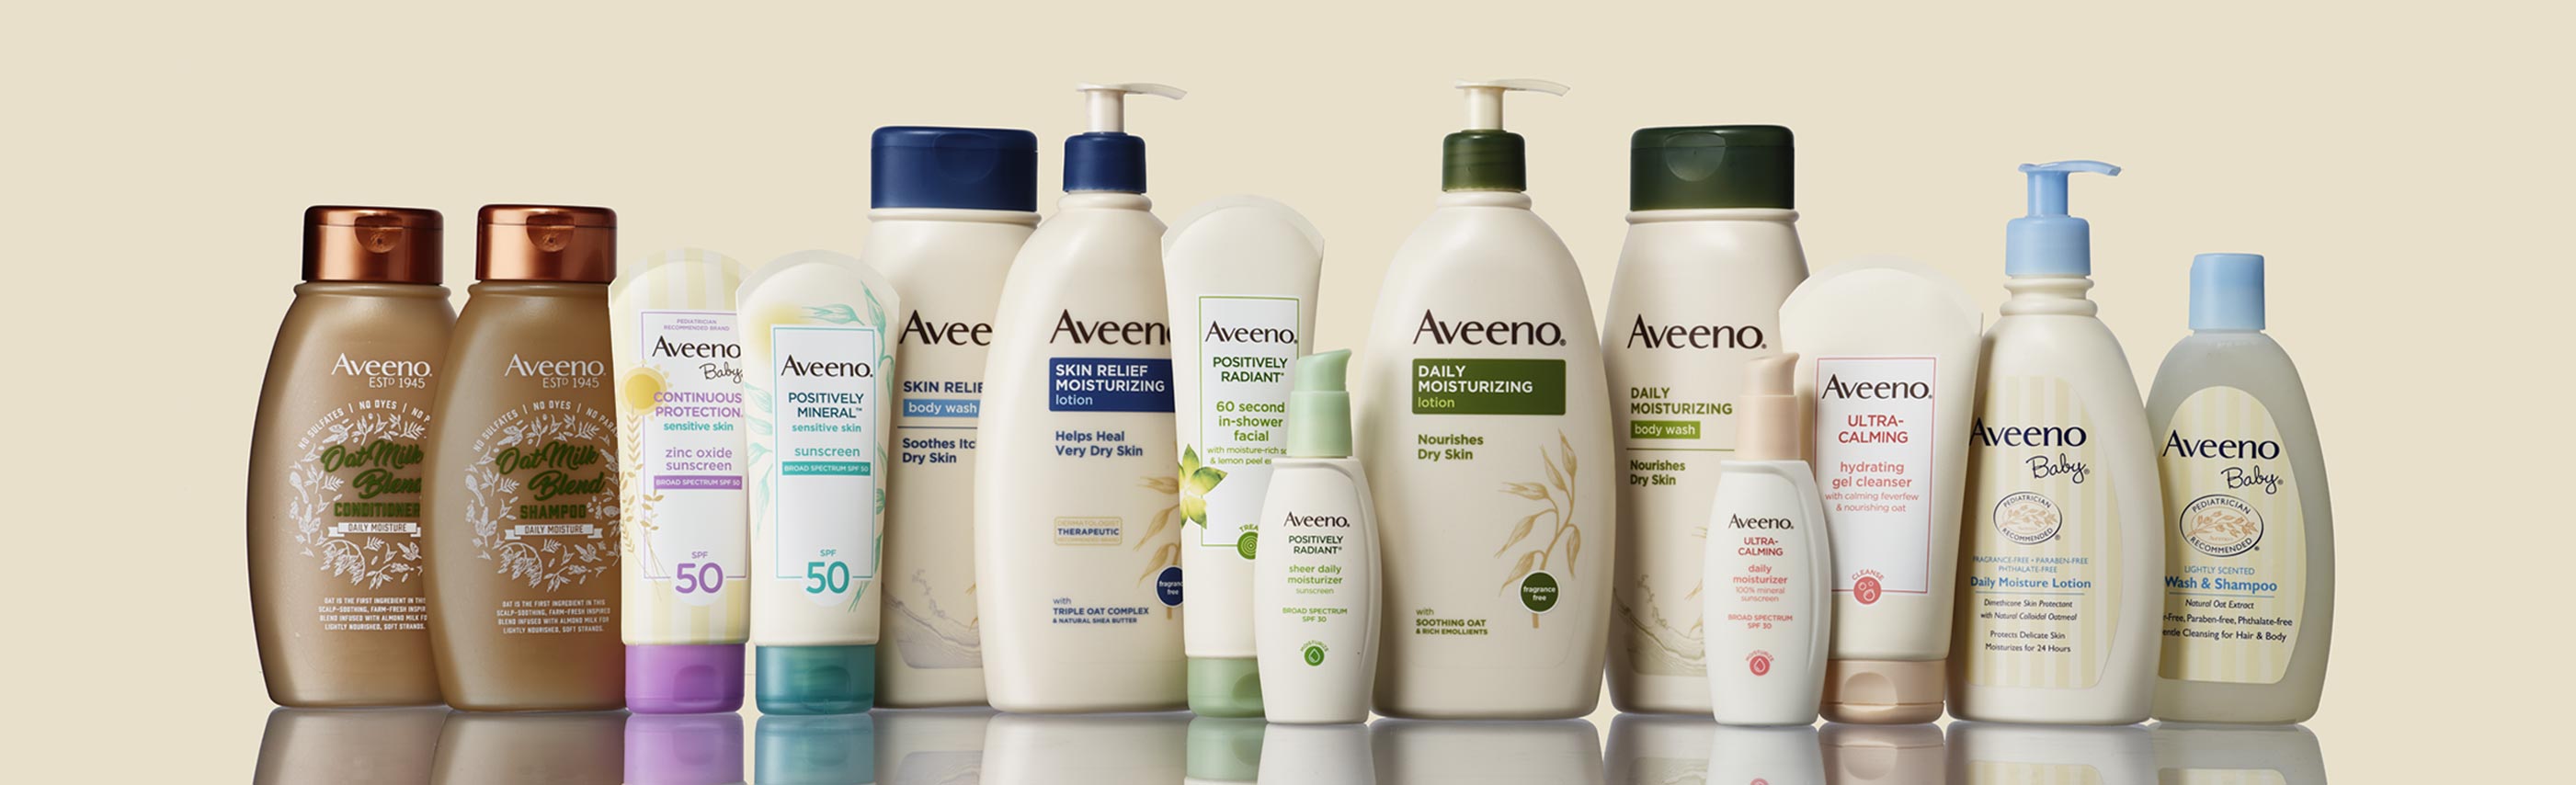 Aveeno products lined up with sunscreen, haircare, skin relief lotion, positively radiant, ultra calming and baby 